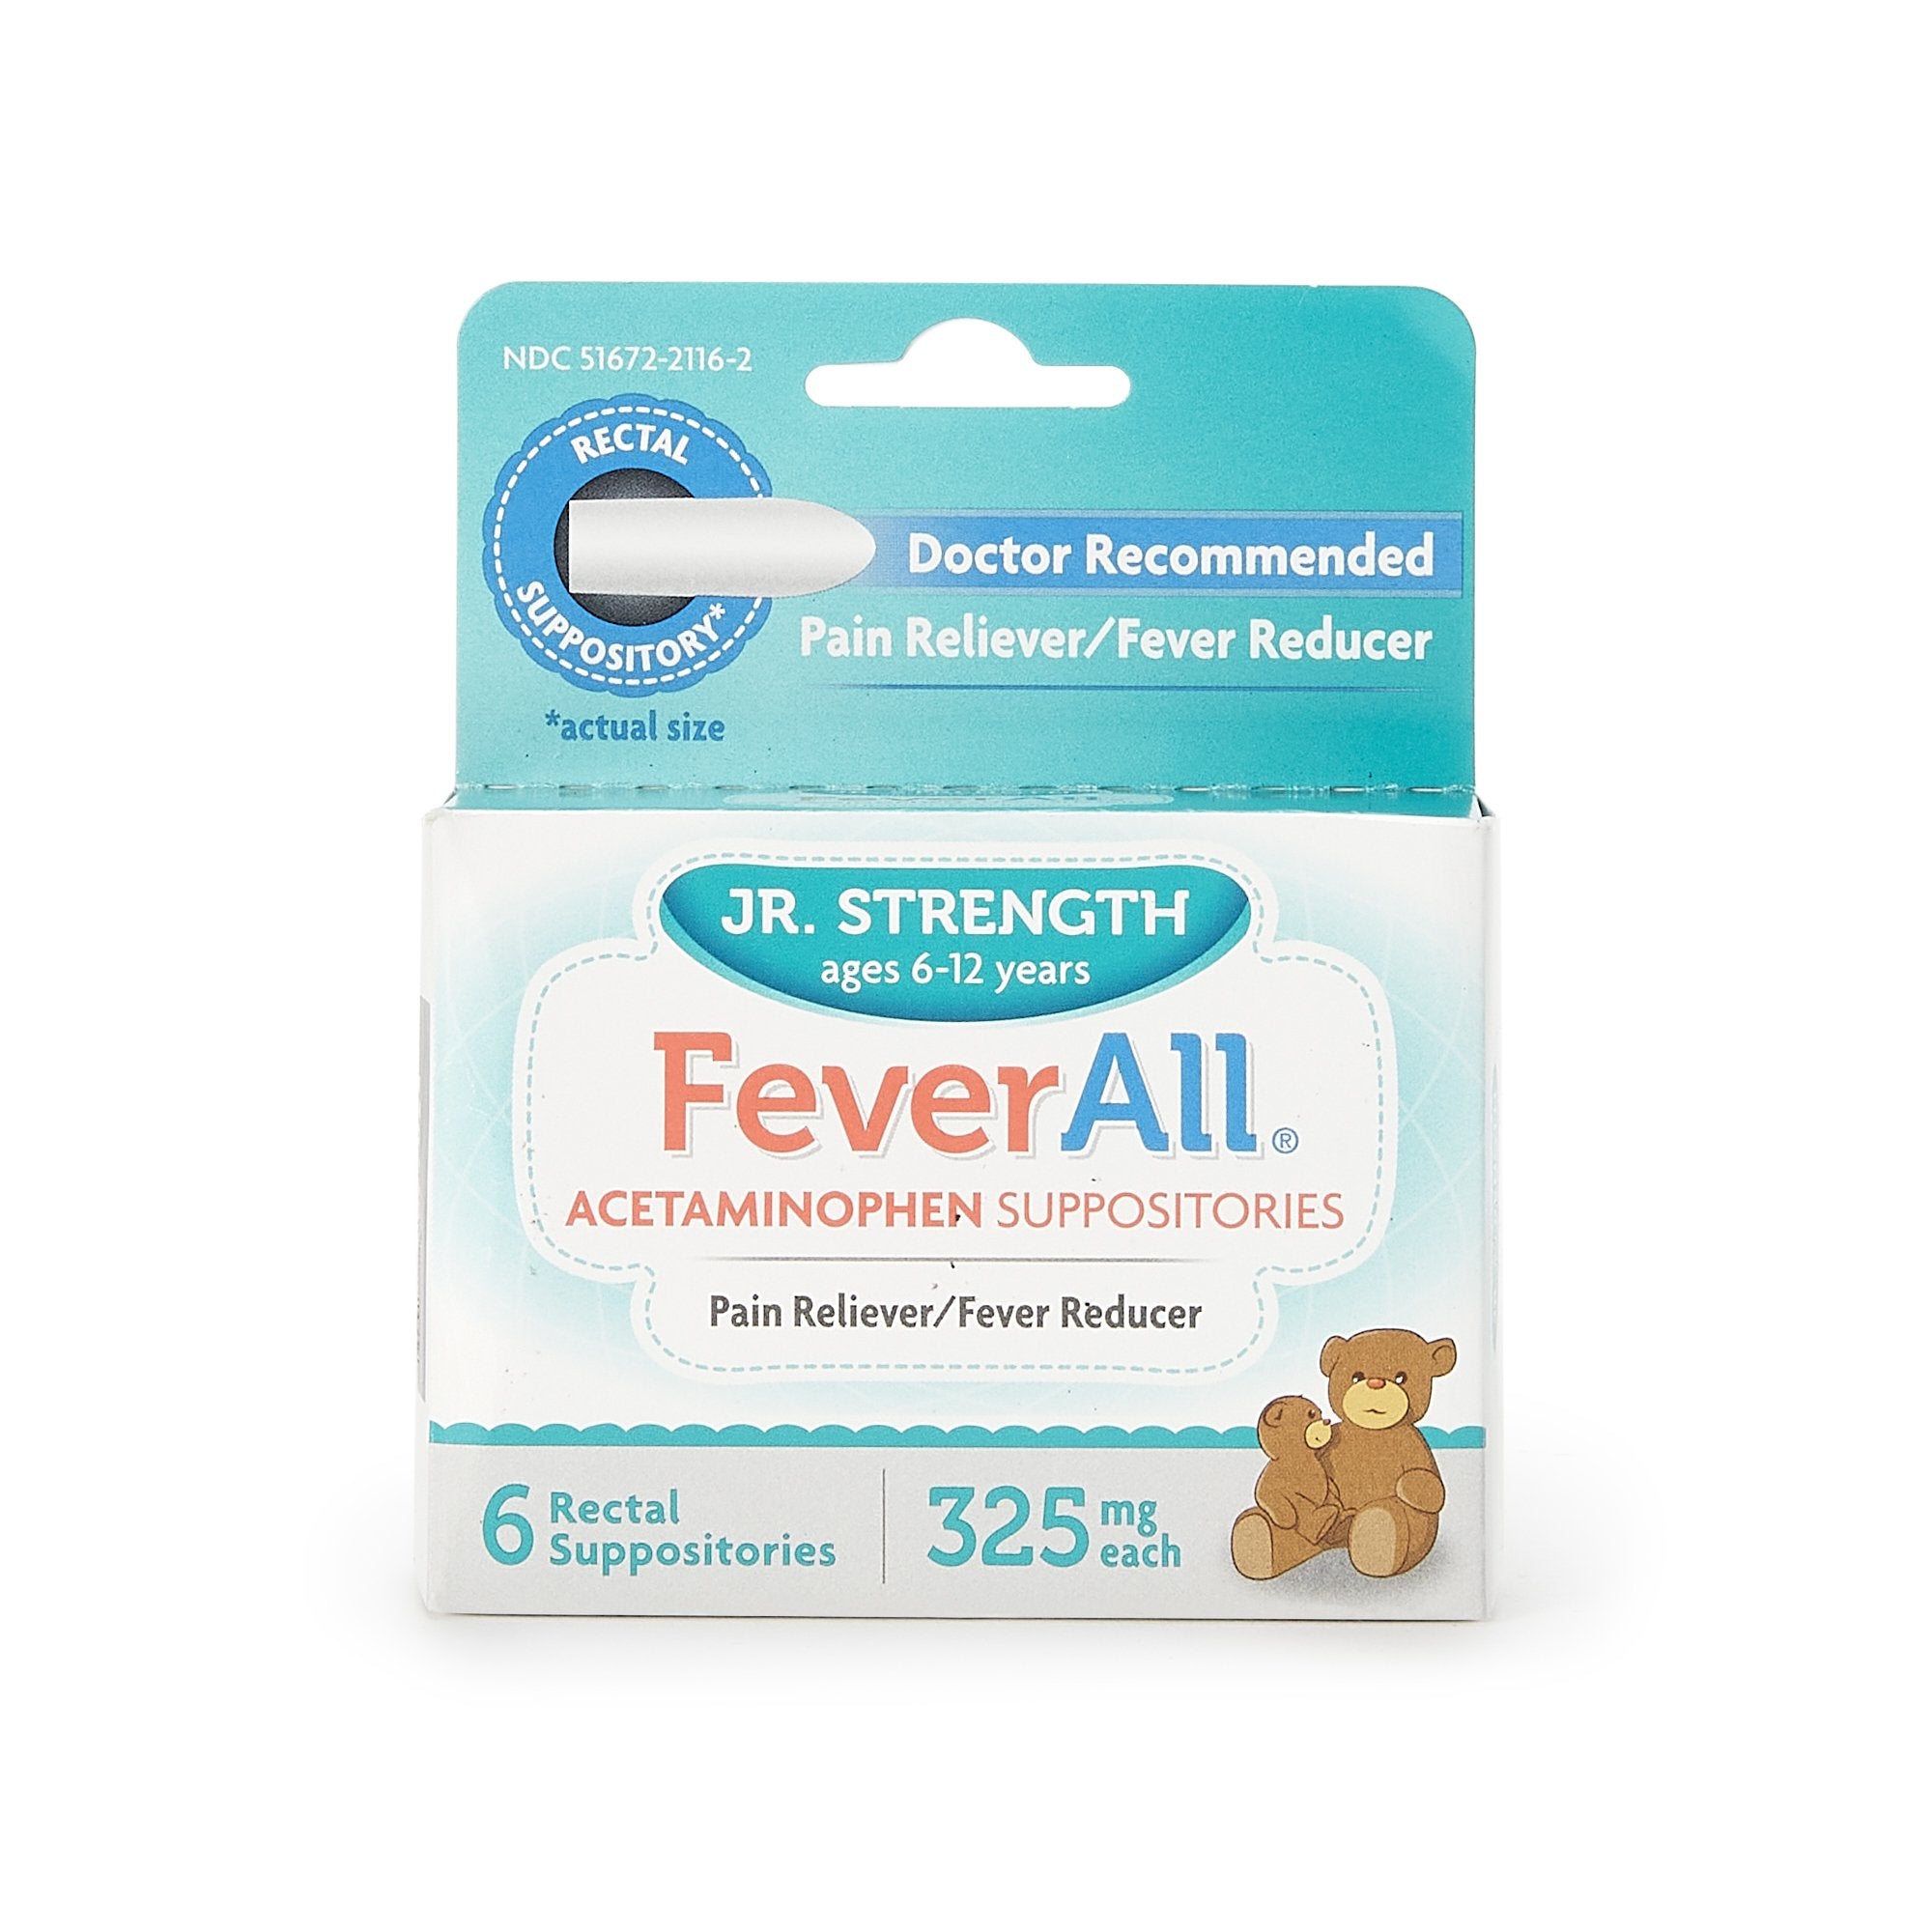 Pain Relief FeverAll® 325 mg Strength Acetaminophen Rectal Suppository 6 per Box